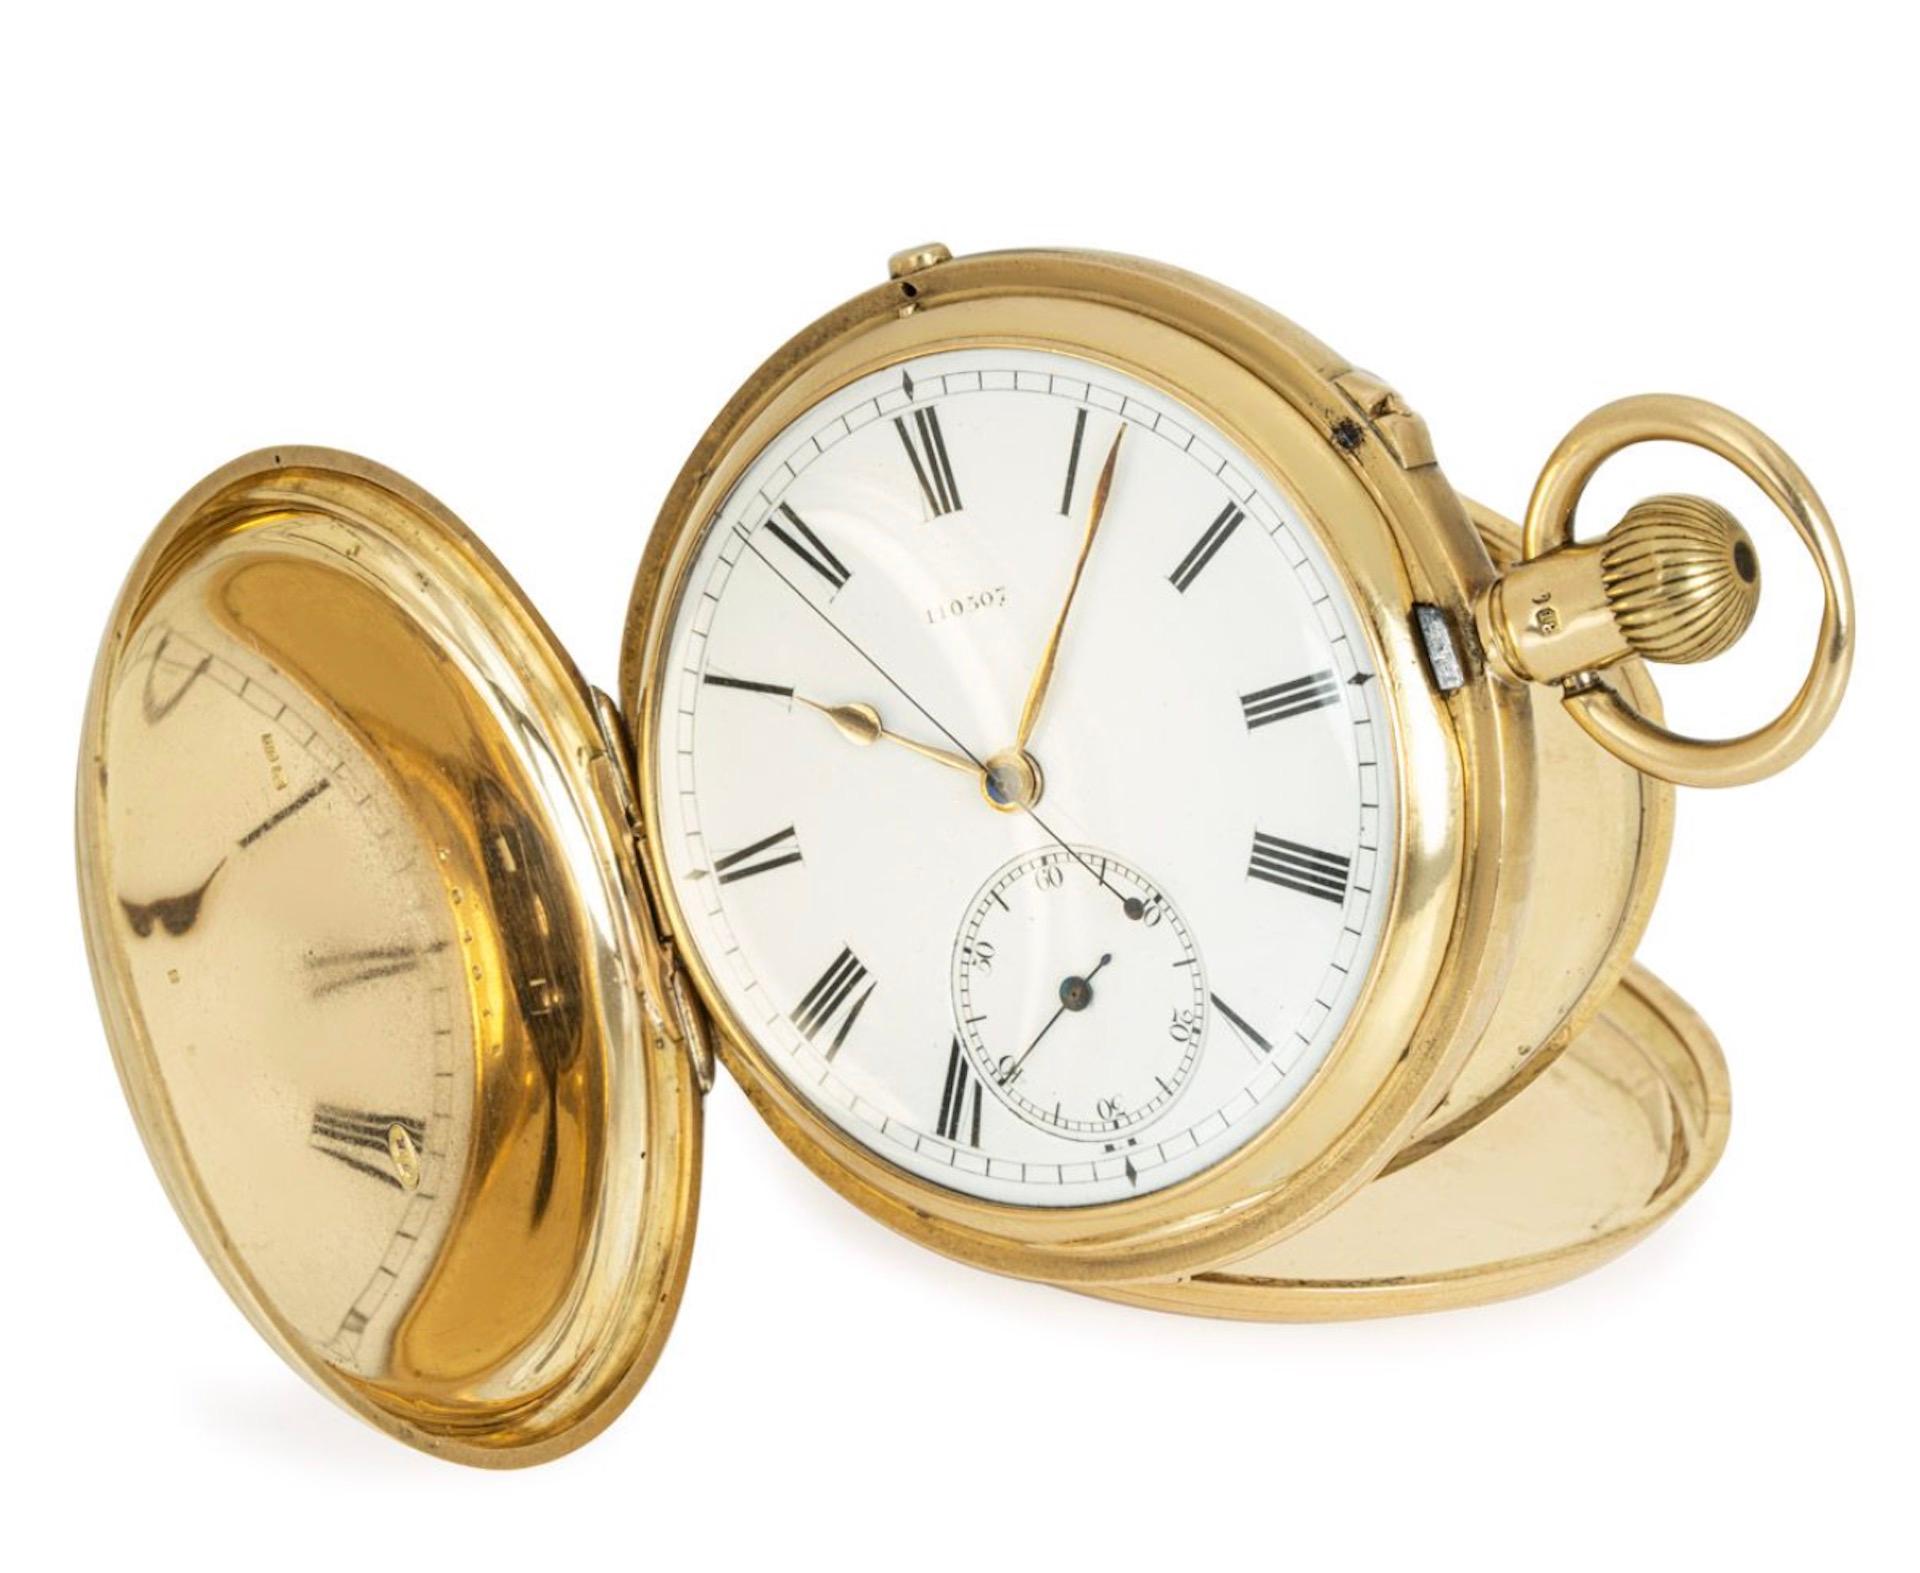 W. Ehrhardt. A Rare Heavy 18ct Gold Keyless Lever Independent Seconds Full Hunter Pocket Watch C1884.

Dial: The white enamel numbered Roman Dial with outer minute track subsidiary seconds dial at six o'clock with gold coloured hands and blued steel